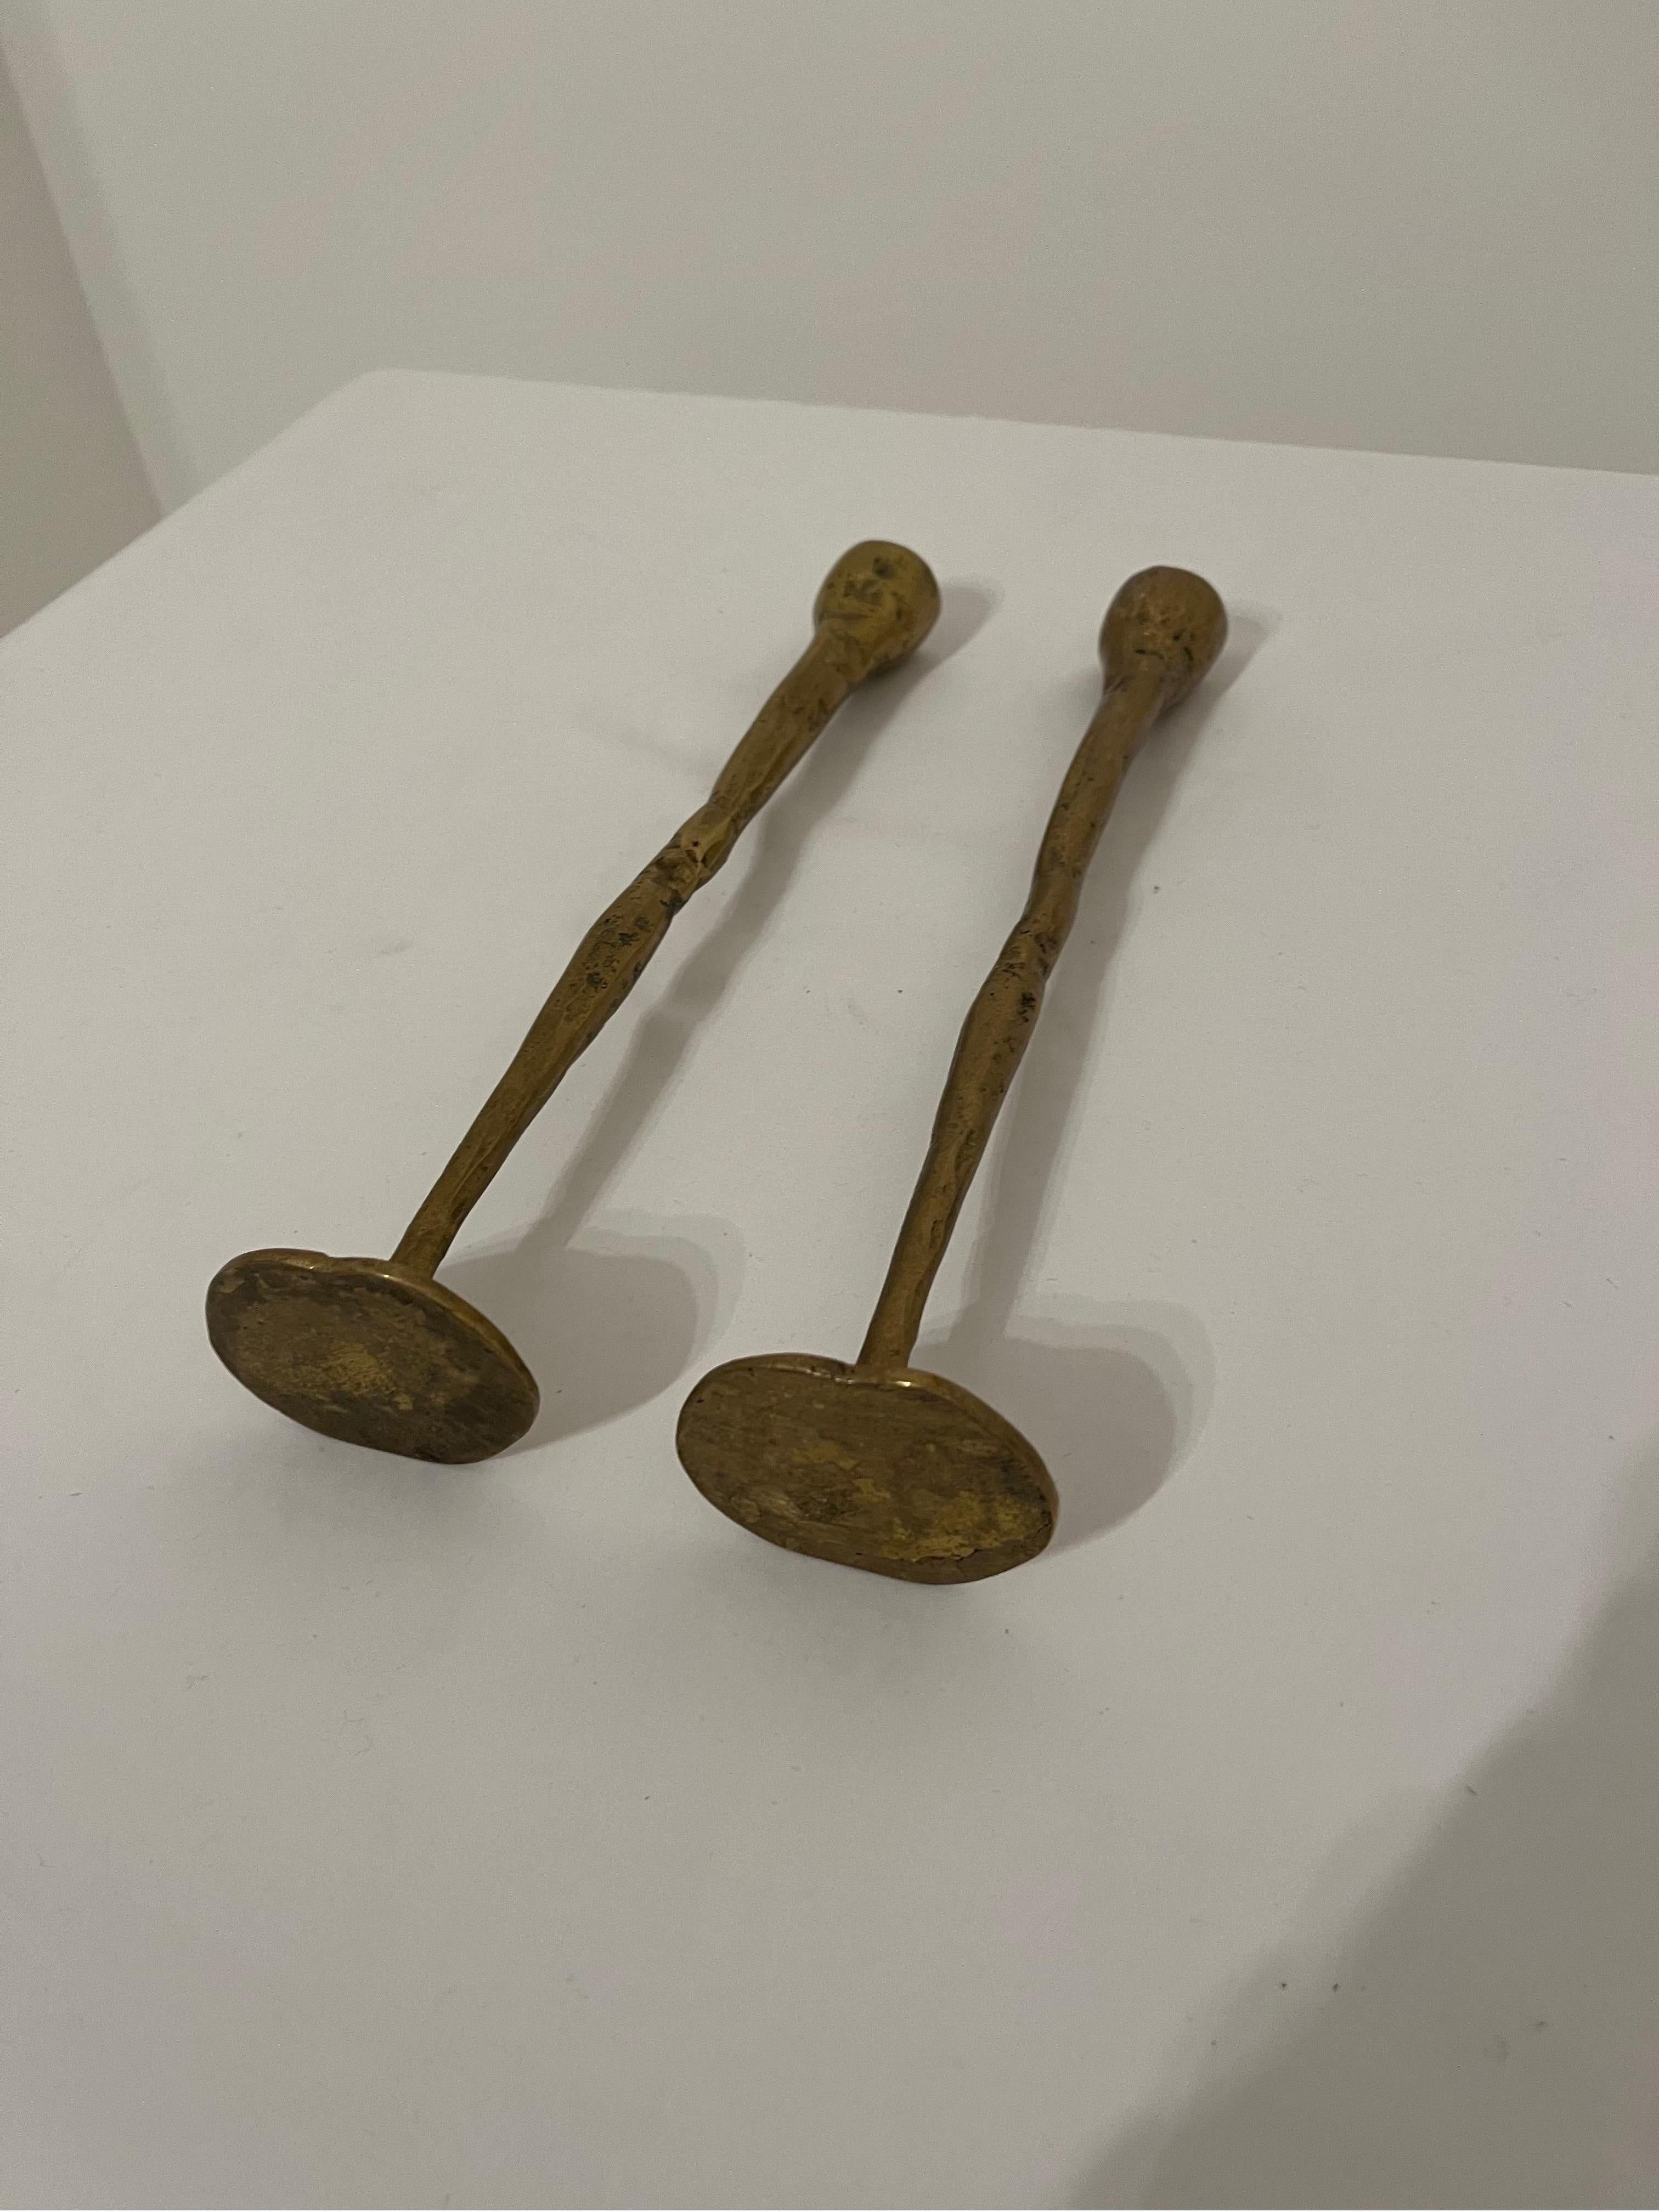 Tall Brutalist Bronze Candlesticks Pair H31cm In Excellent Condition For Sale In Gravesend, GB